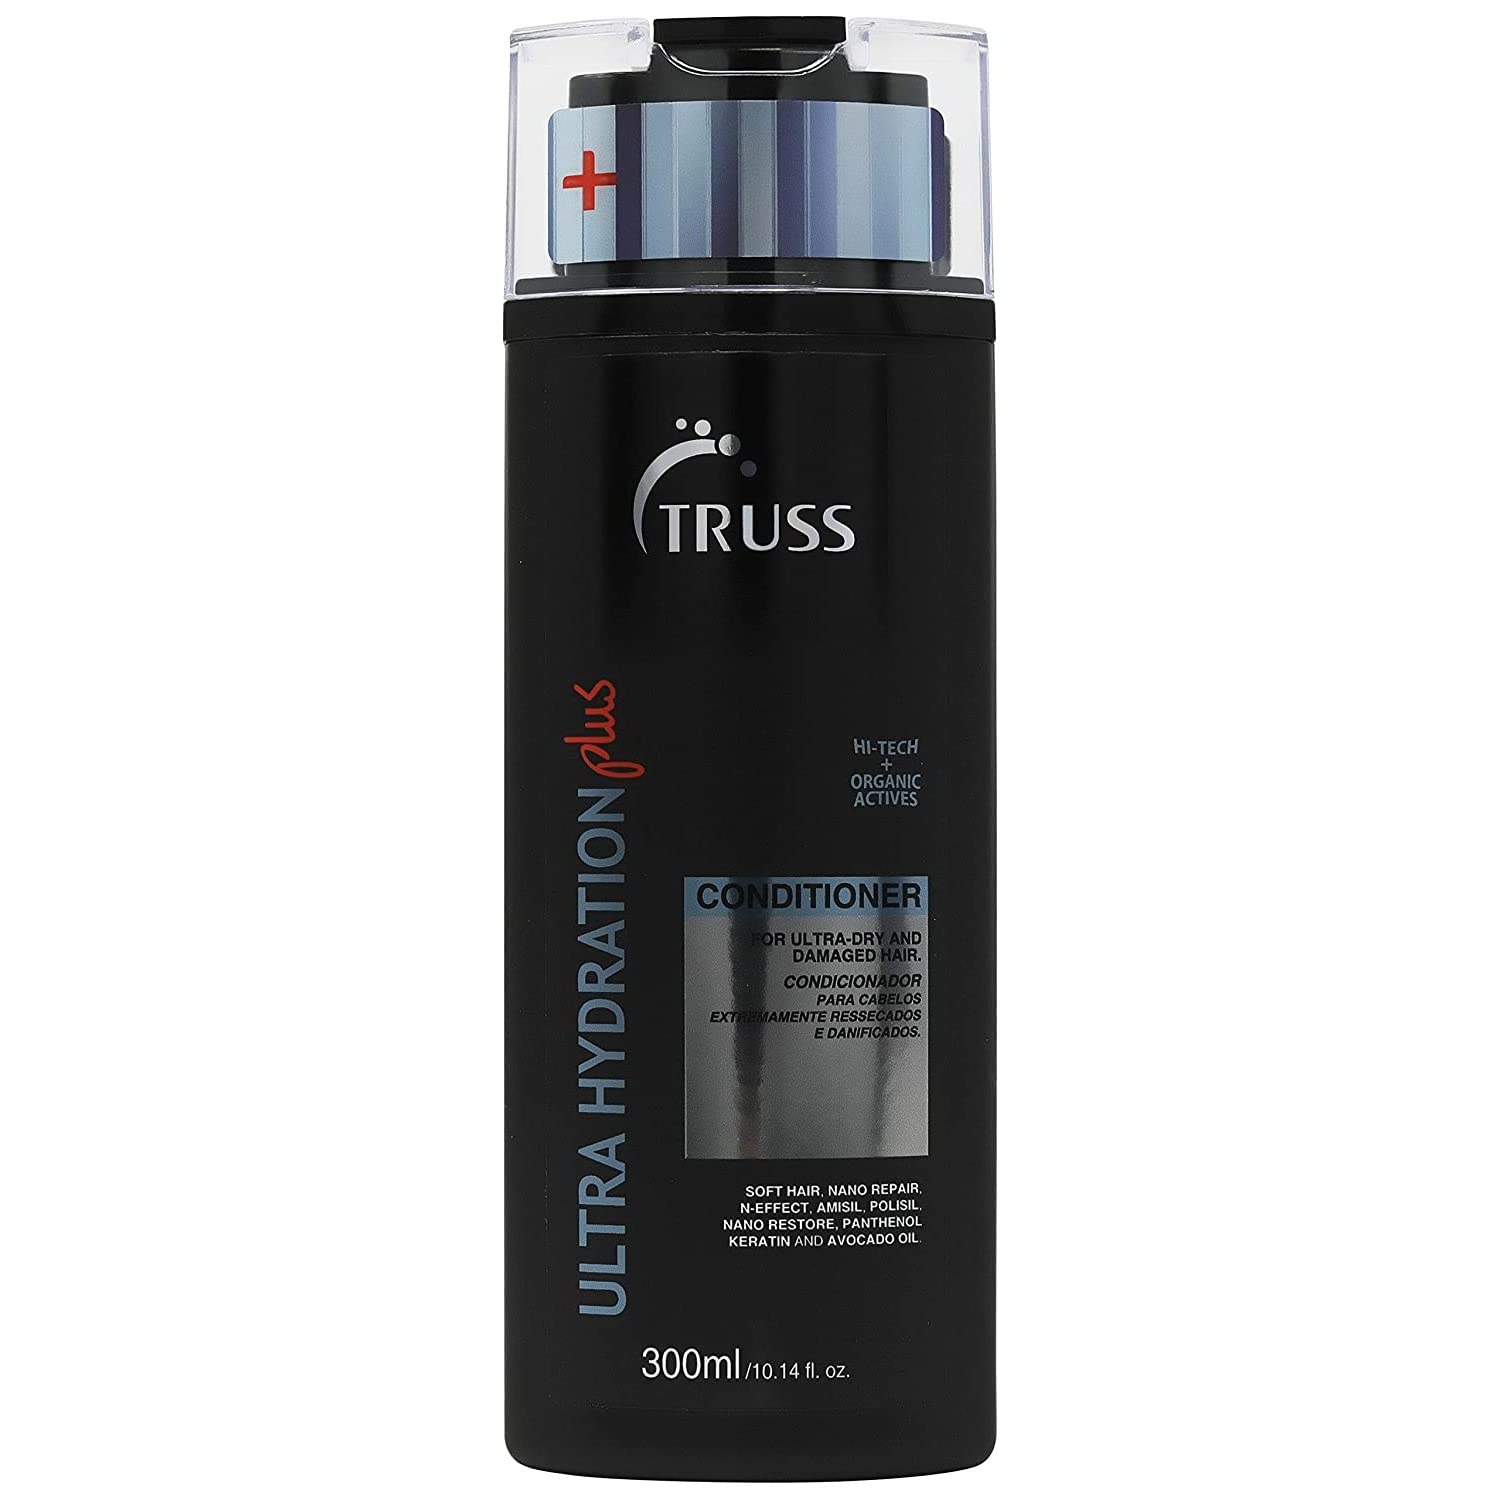 Truss Ultra Hydration PLUS Conditioner - For Extremely Dry, Damaged Hair, Intensive Repair, Hydration, Restores Elasticity, Color Protection, Anti-Frizz Conditioner, Ideal for All Hair Types & Textures